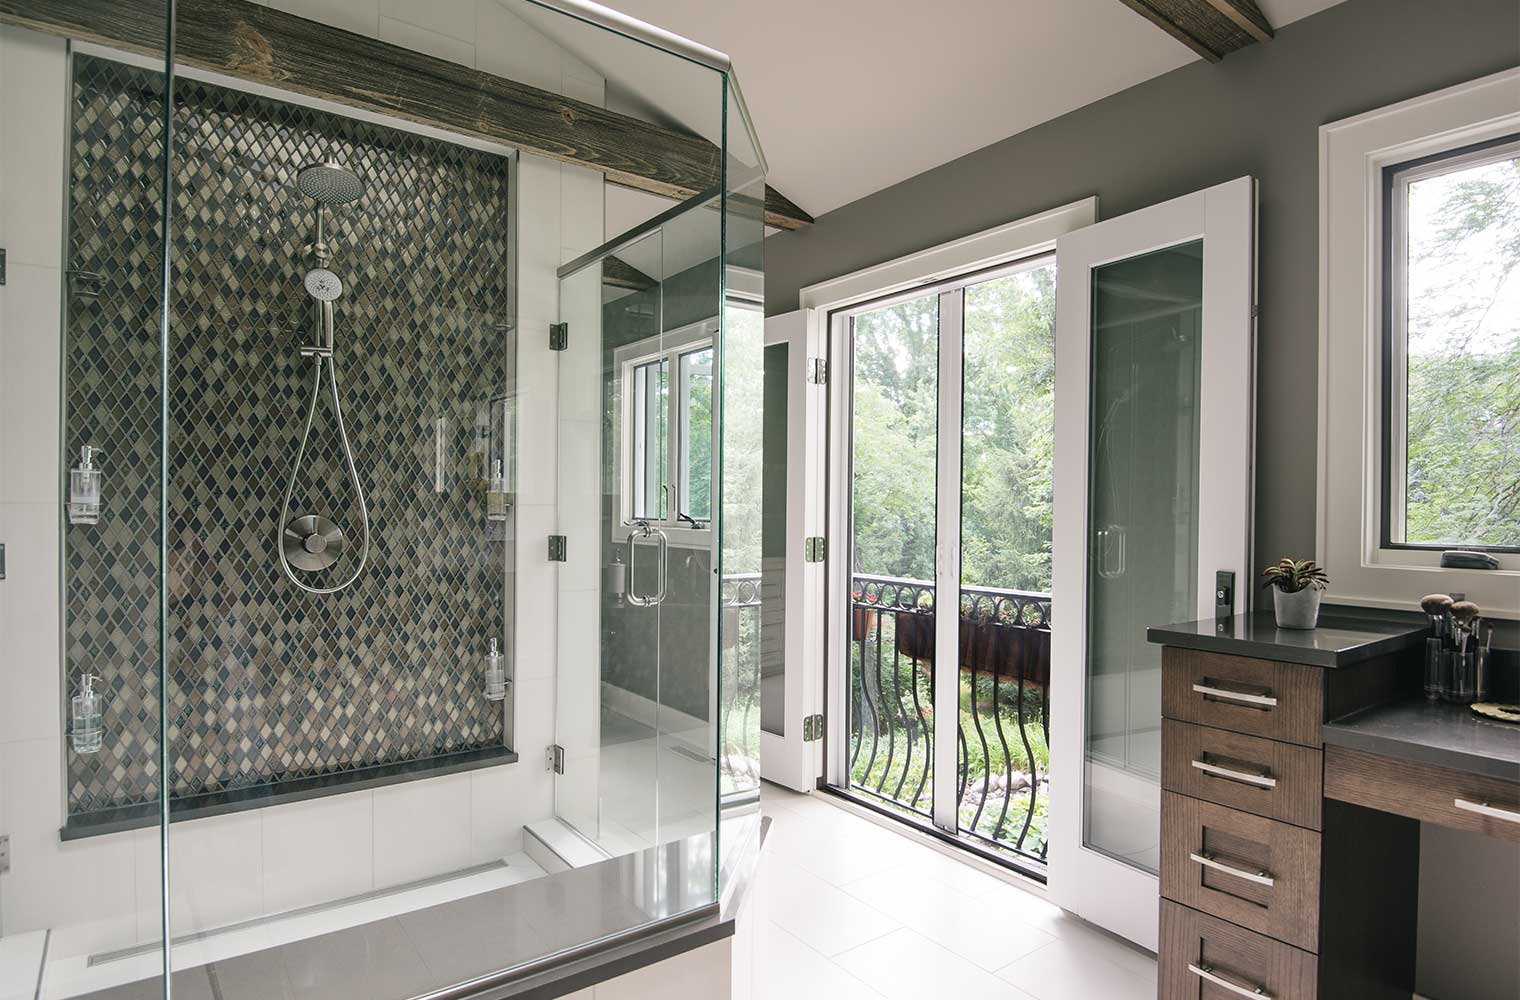 Juliet balcony in contemporary master bathroom with central glass enclosed shower offers backyard views by designer and remodeler Silent Rivers of Des Moines, Iowa